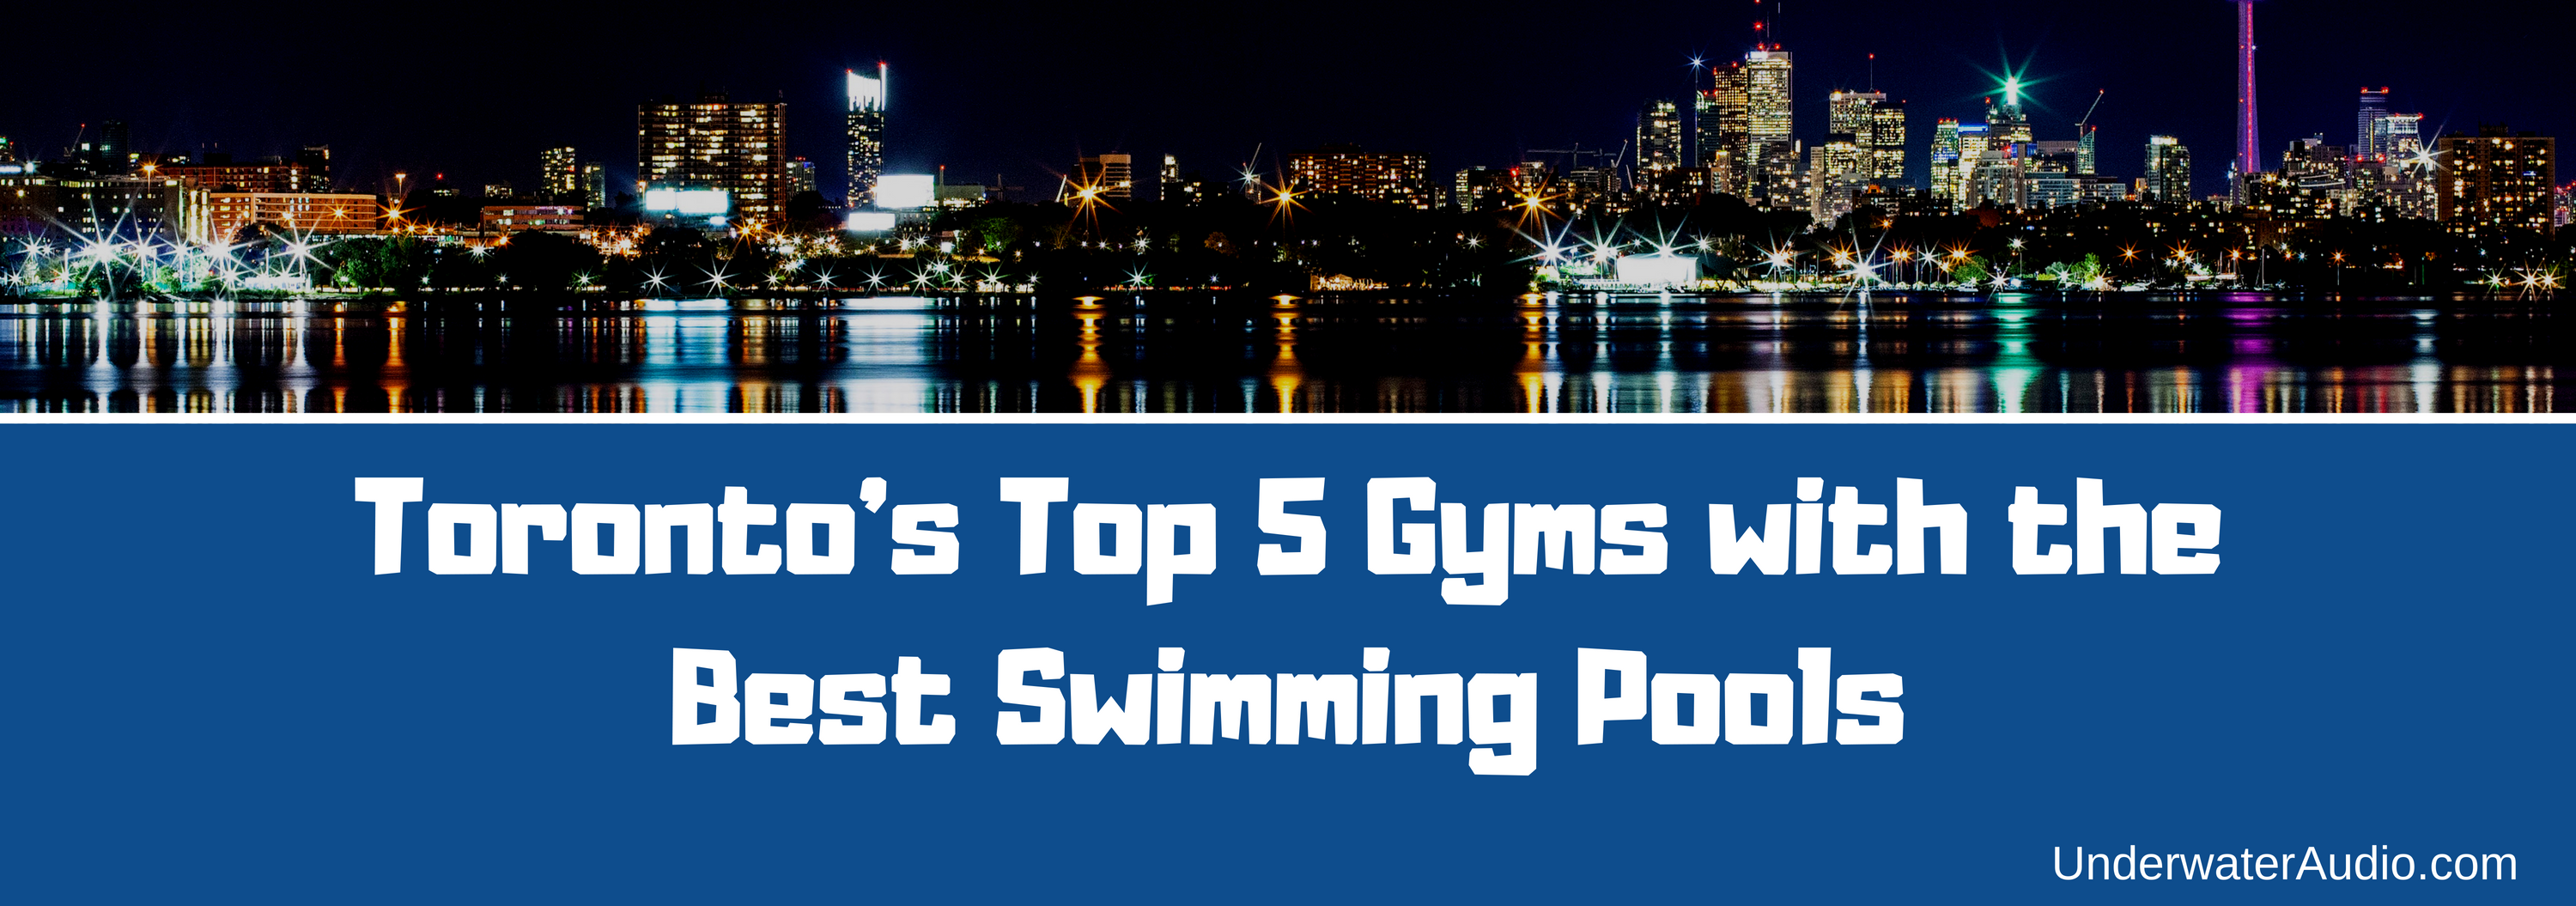 Toronto's Top 5 Gyms with the Best Swimming Pools